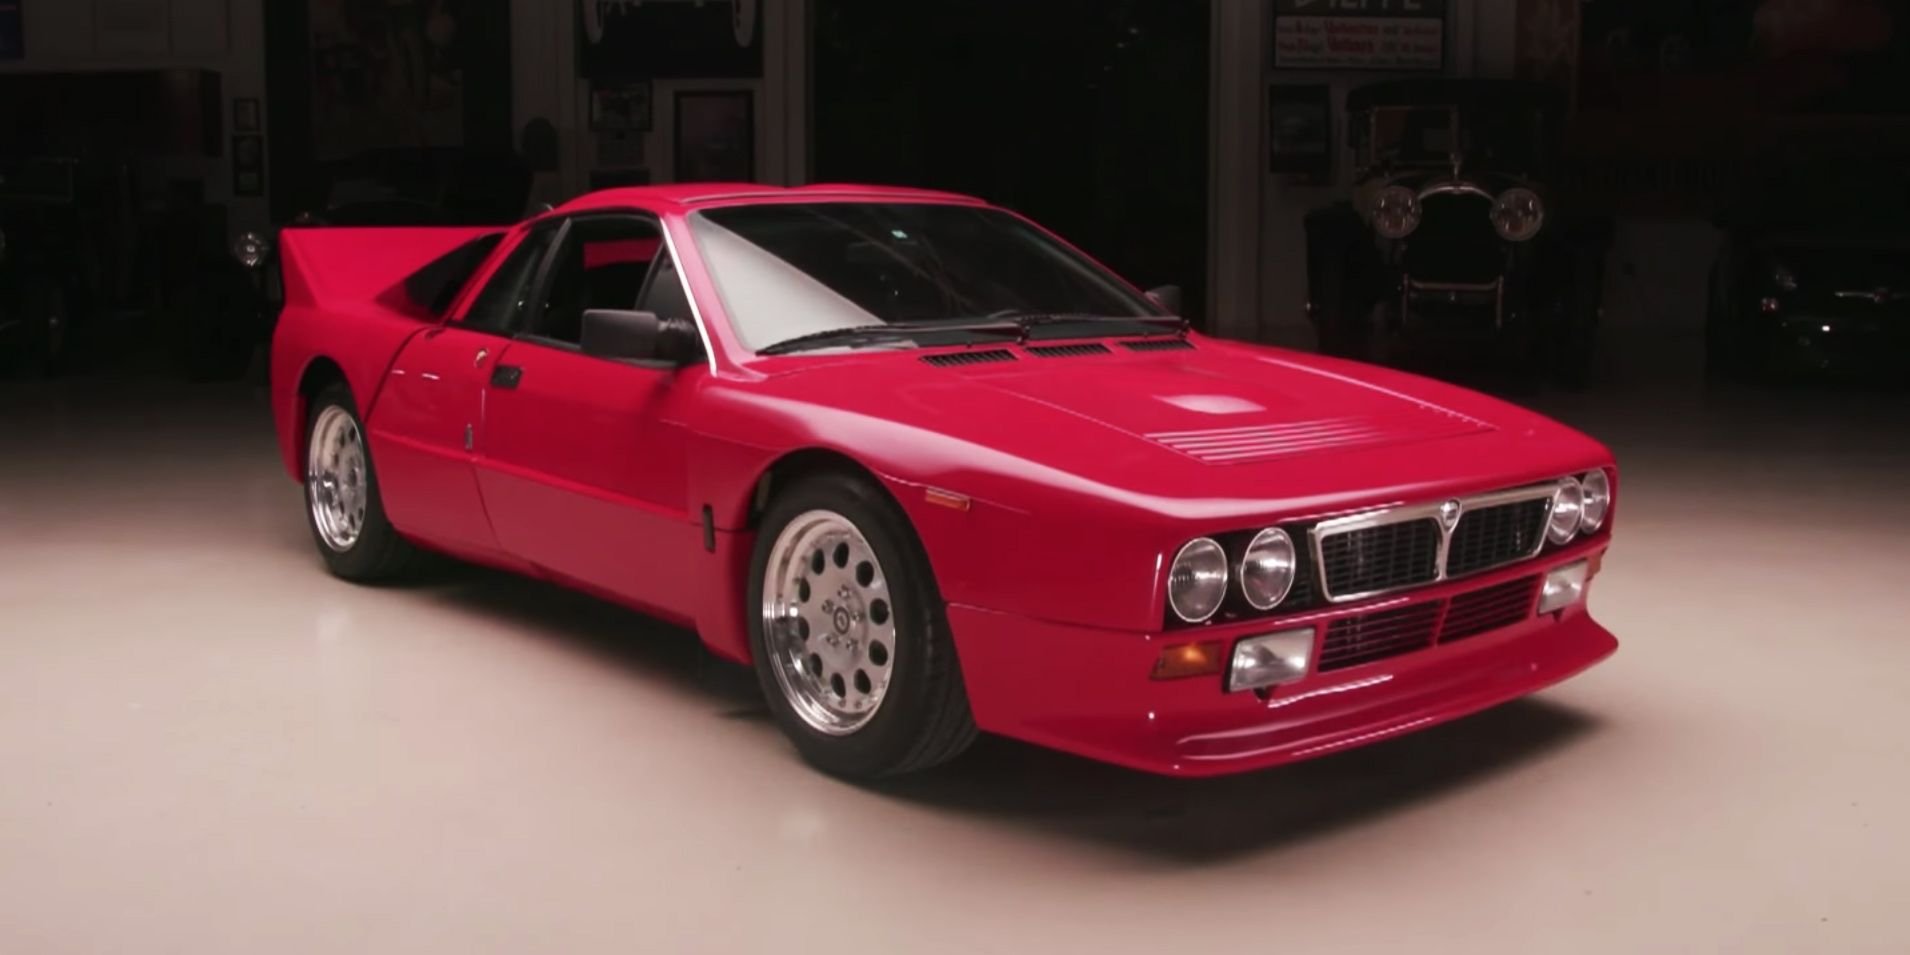 The Lancia 037 Remains One of the Wildest Homologation Specials